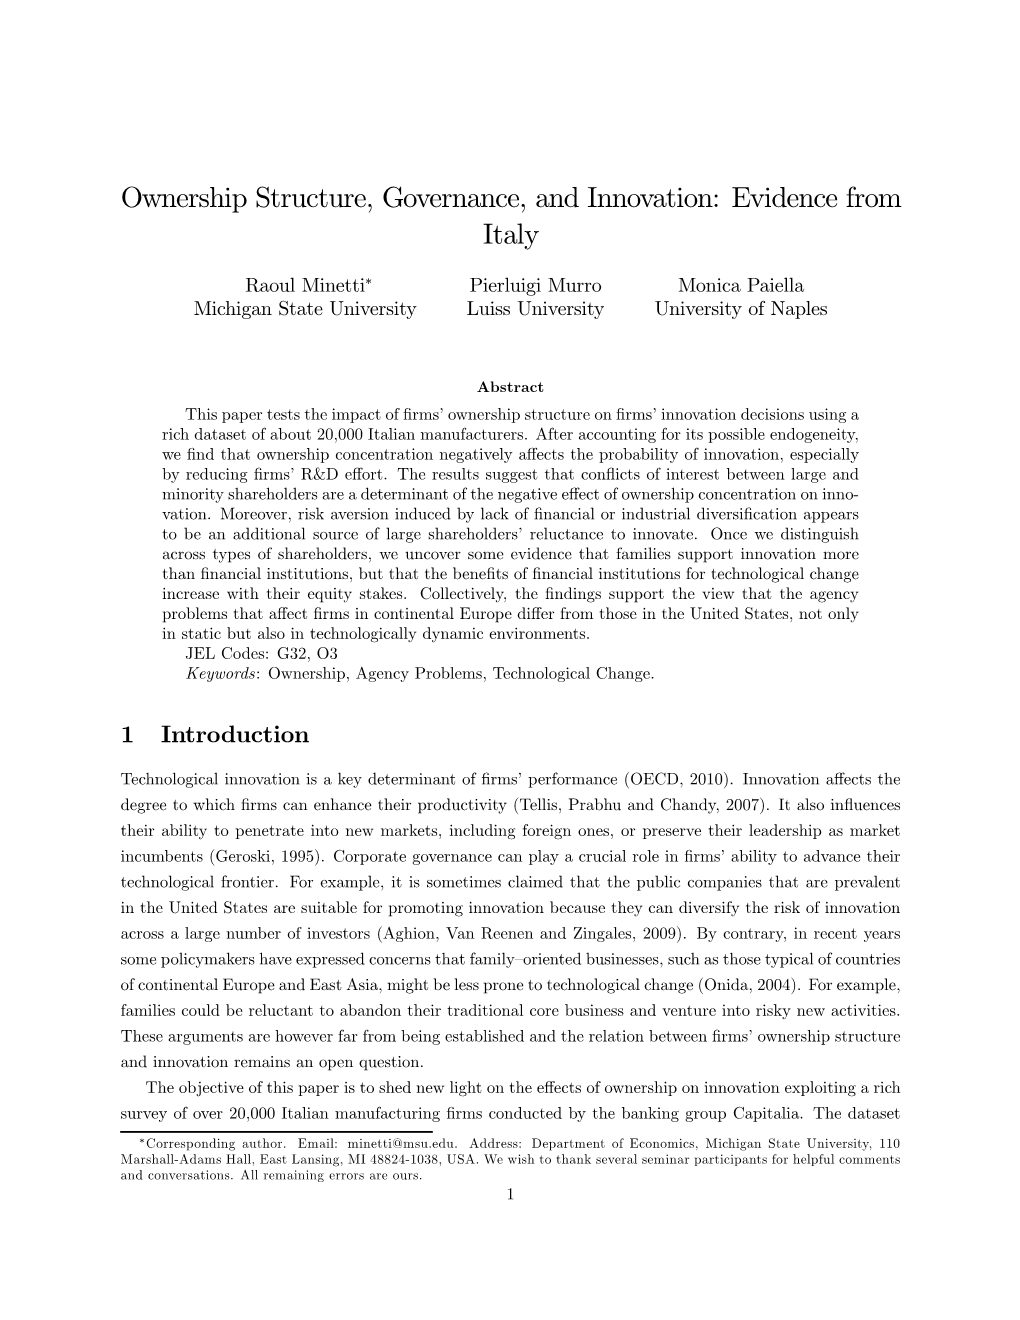 Ownership Structure, Governance, and Innovation: Evidence from Italy